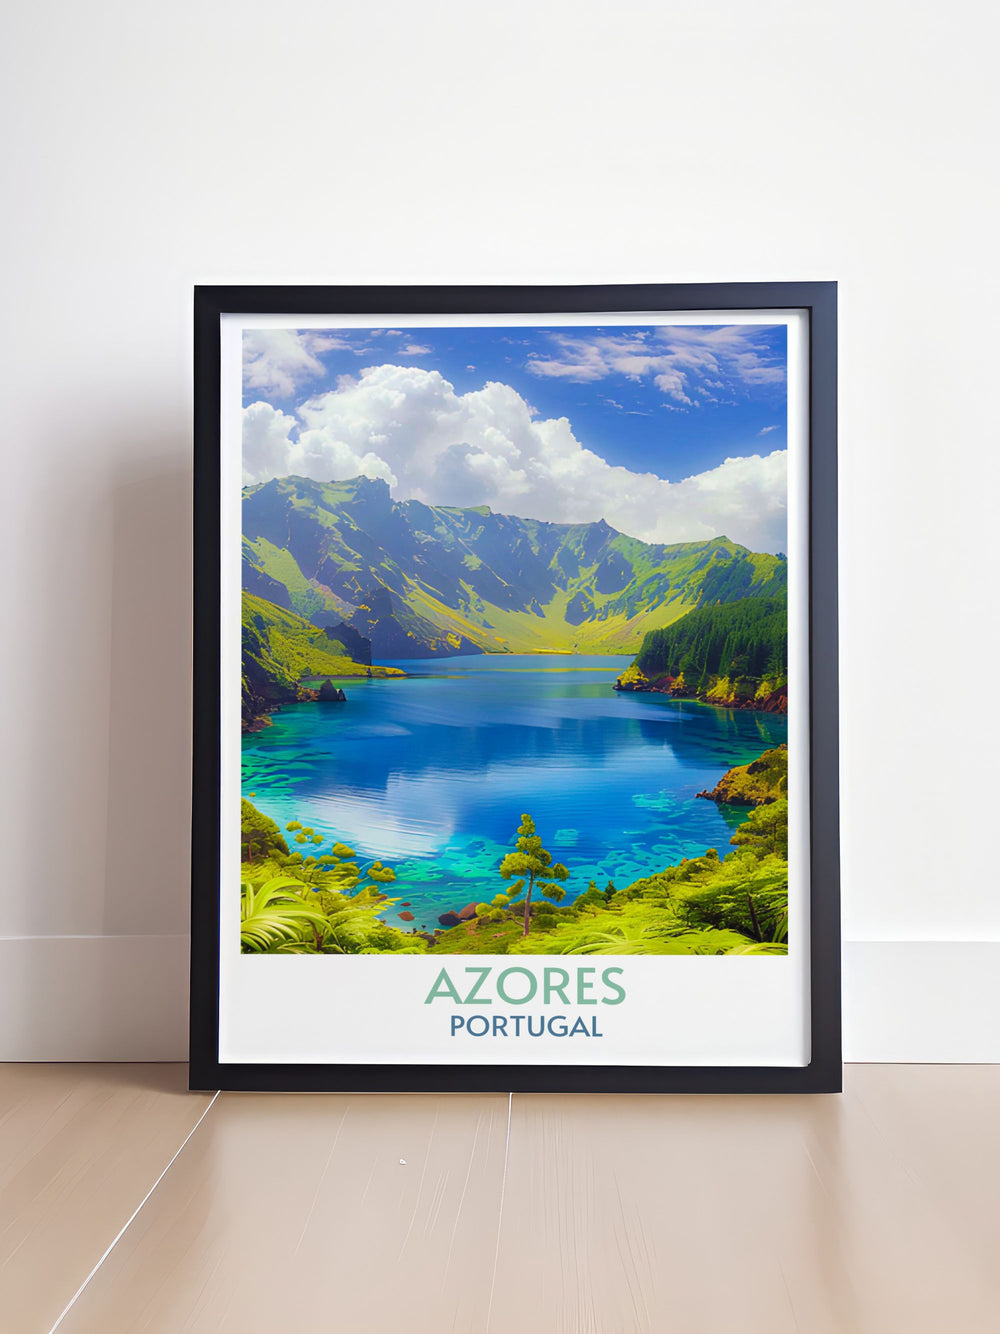 Azores map print highlighting Lagoa do Fogo, perfect for those who love travel and exploration, rendered in exquisite detail.